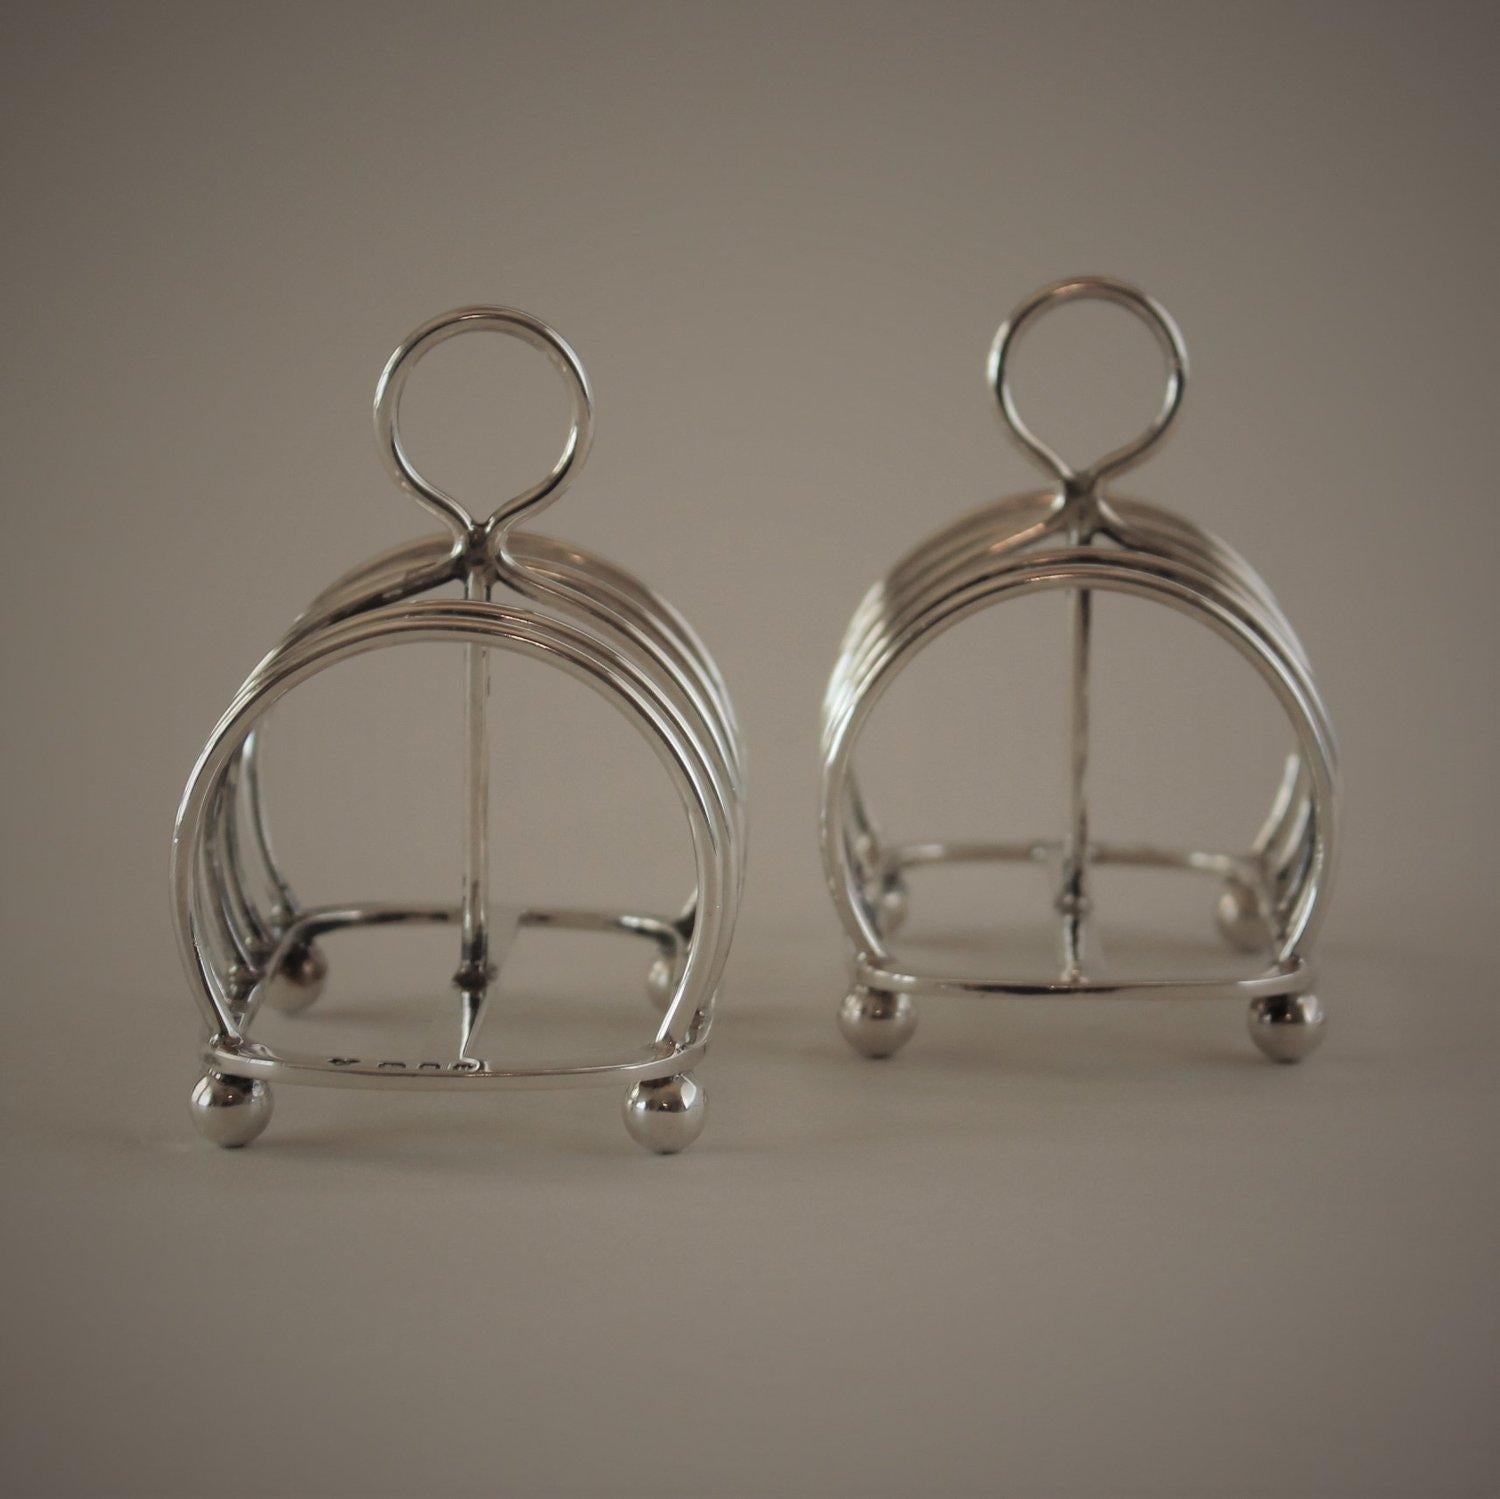 A pair of English sterling silver toast racks

Can also be used as desk item for storage cards & letters.

 Designer: Unknown
 Maker: Unknown
 Design #: n/a
 circa 1935
 Dimensions: 3